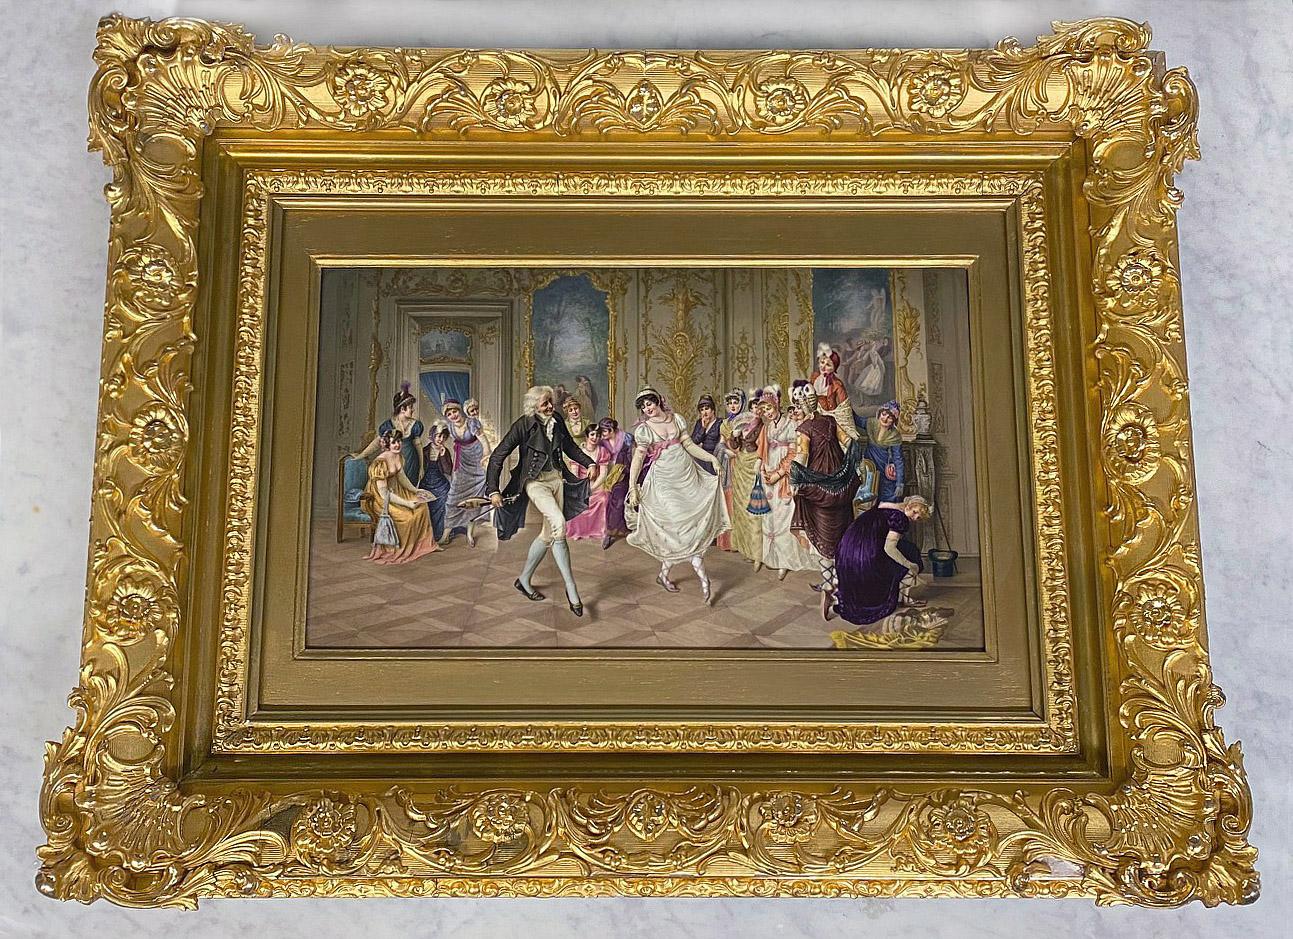 A fantastic quality late 19th century Berlin K.P.M. Porcelain rectangular figural plaque

Finely painted after T. Rosenthal with a ballroom interior scene depicting a fiddler and a young woman dancing together before a group of fashionable